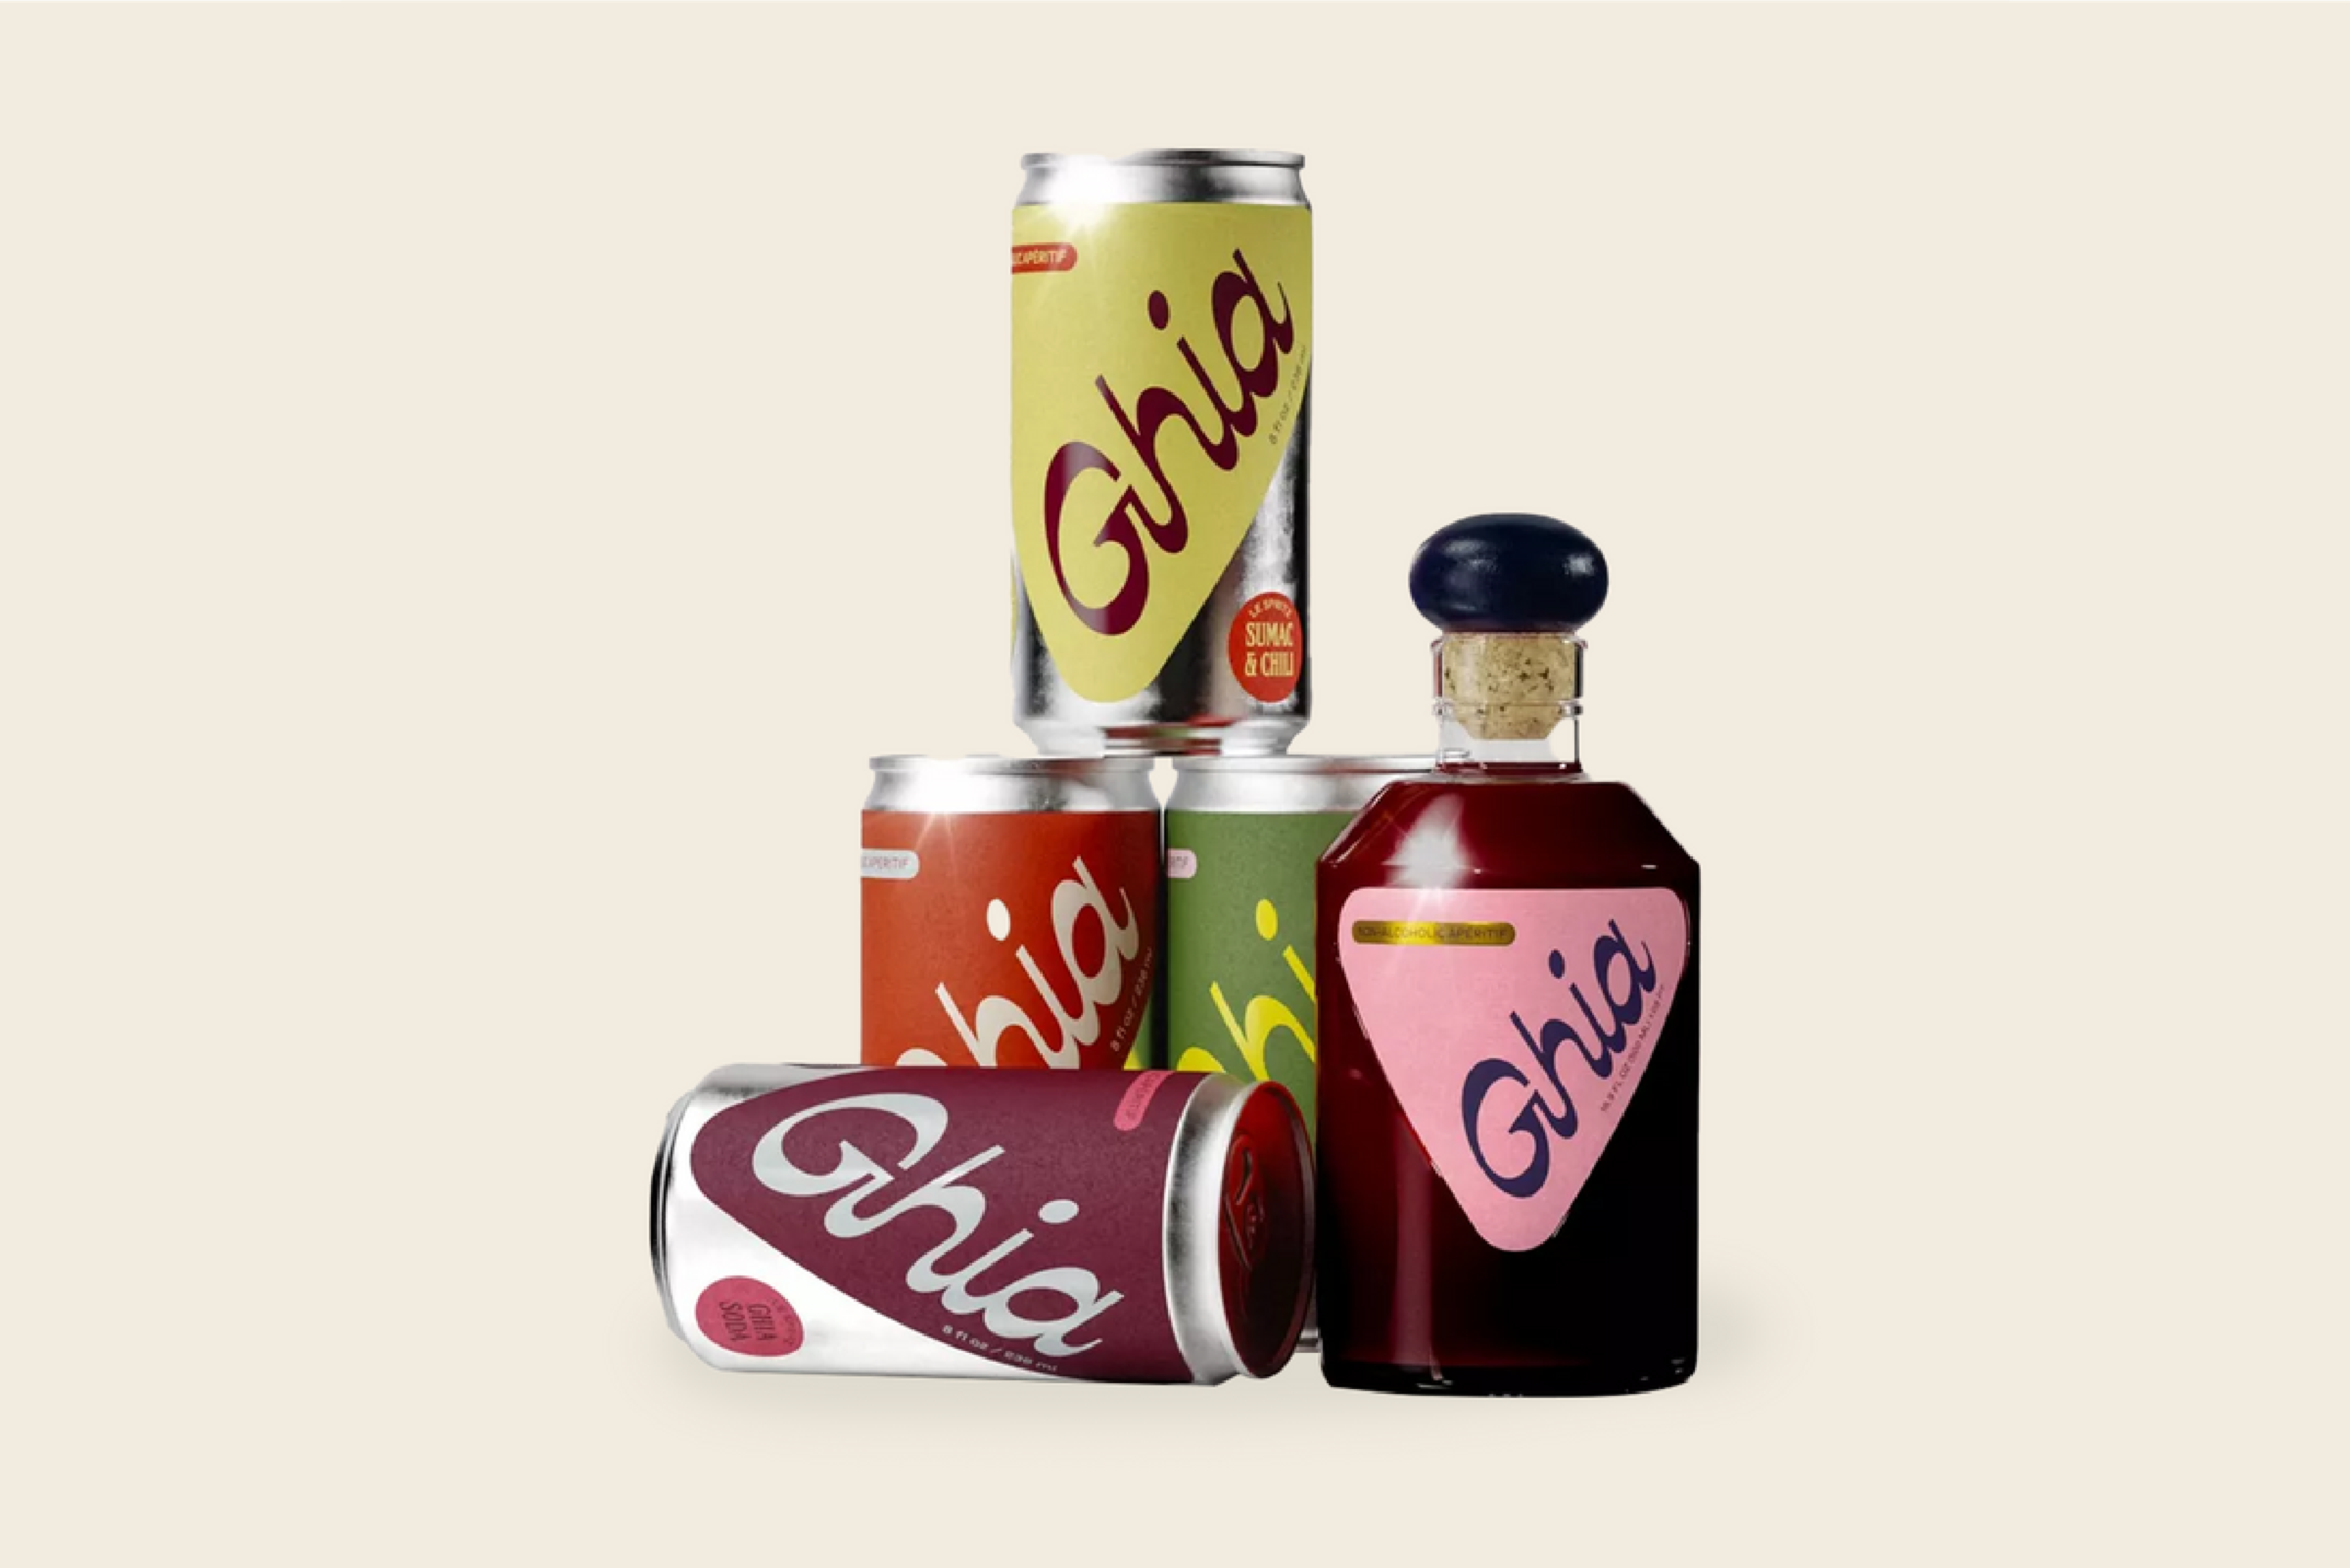 An Alcohol-Free Cocktail Box by Ghia